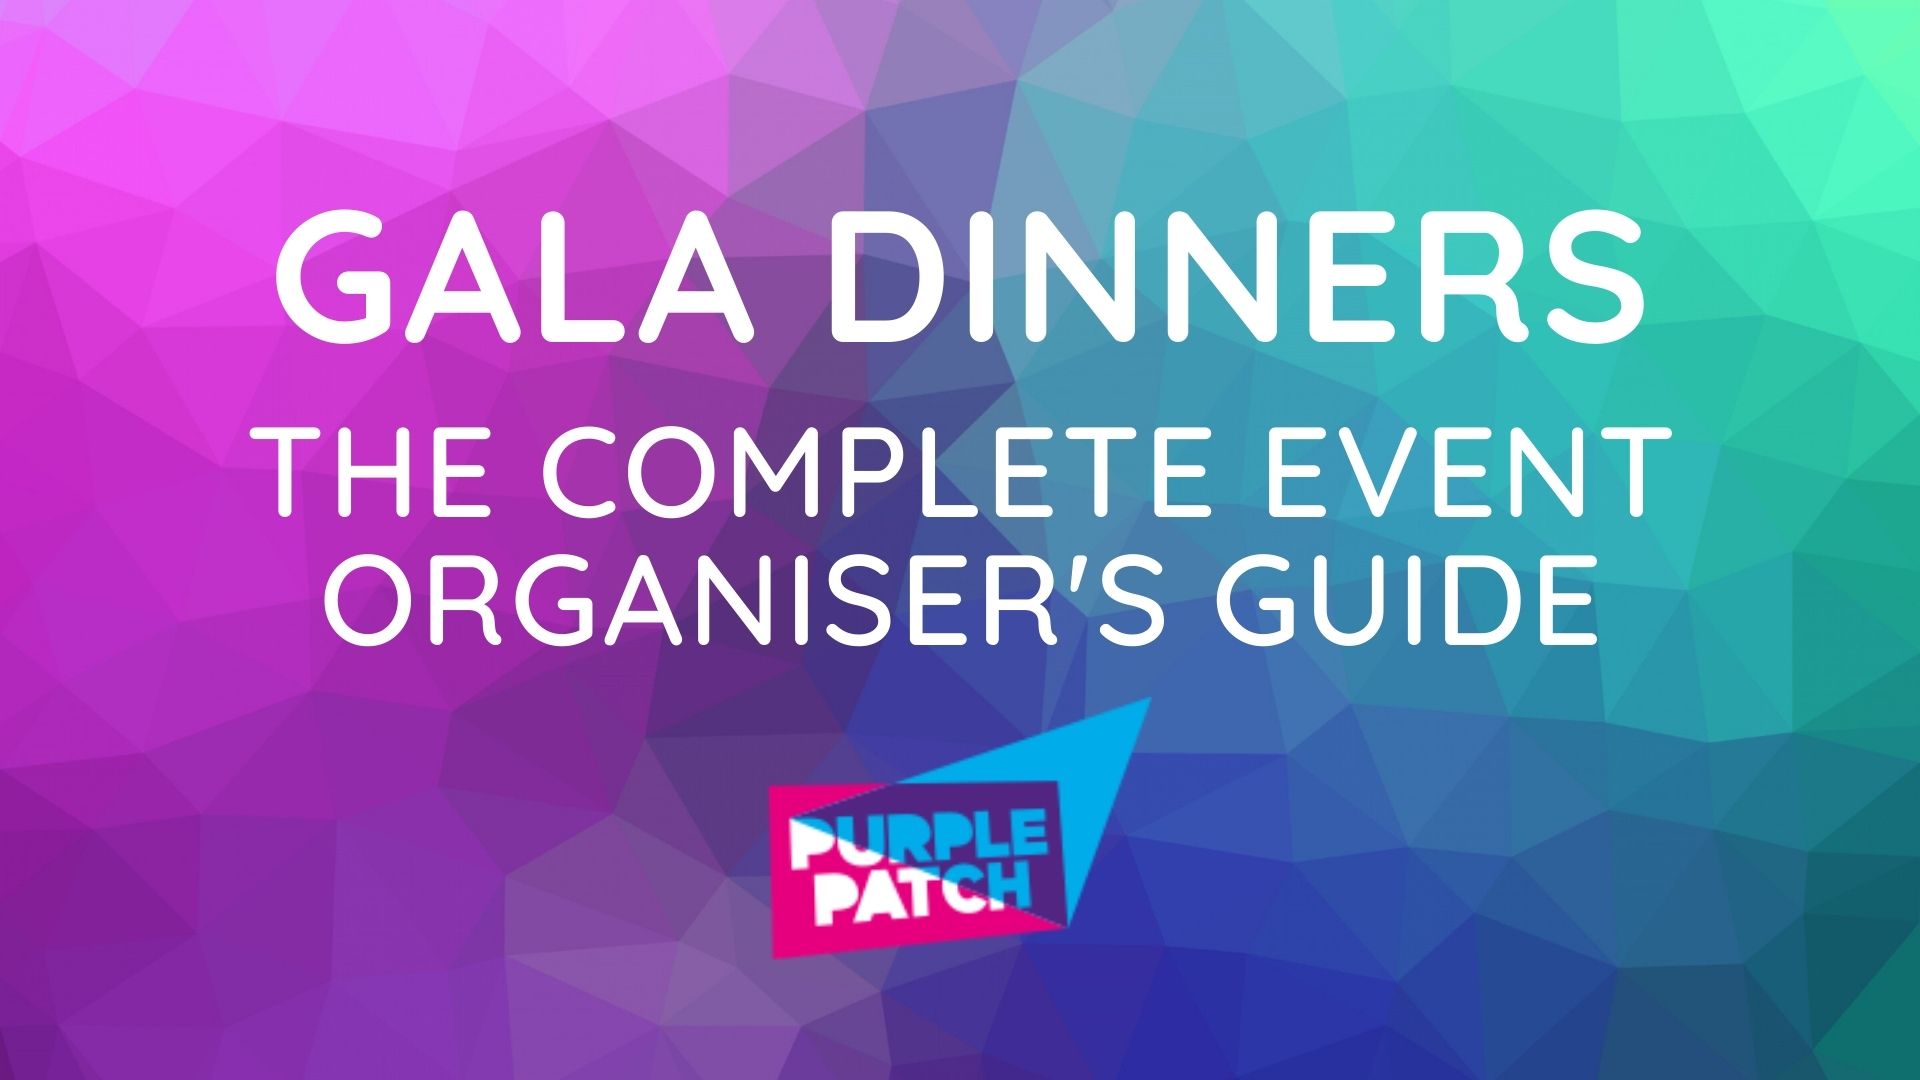 Gala Dinners: The Complete Event Organiser’s Guide